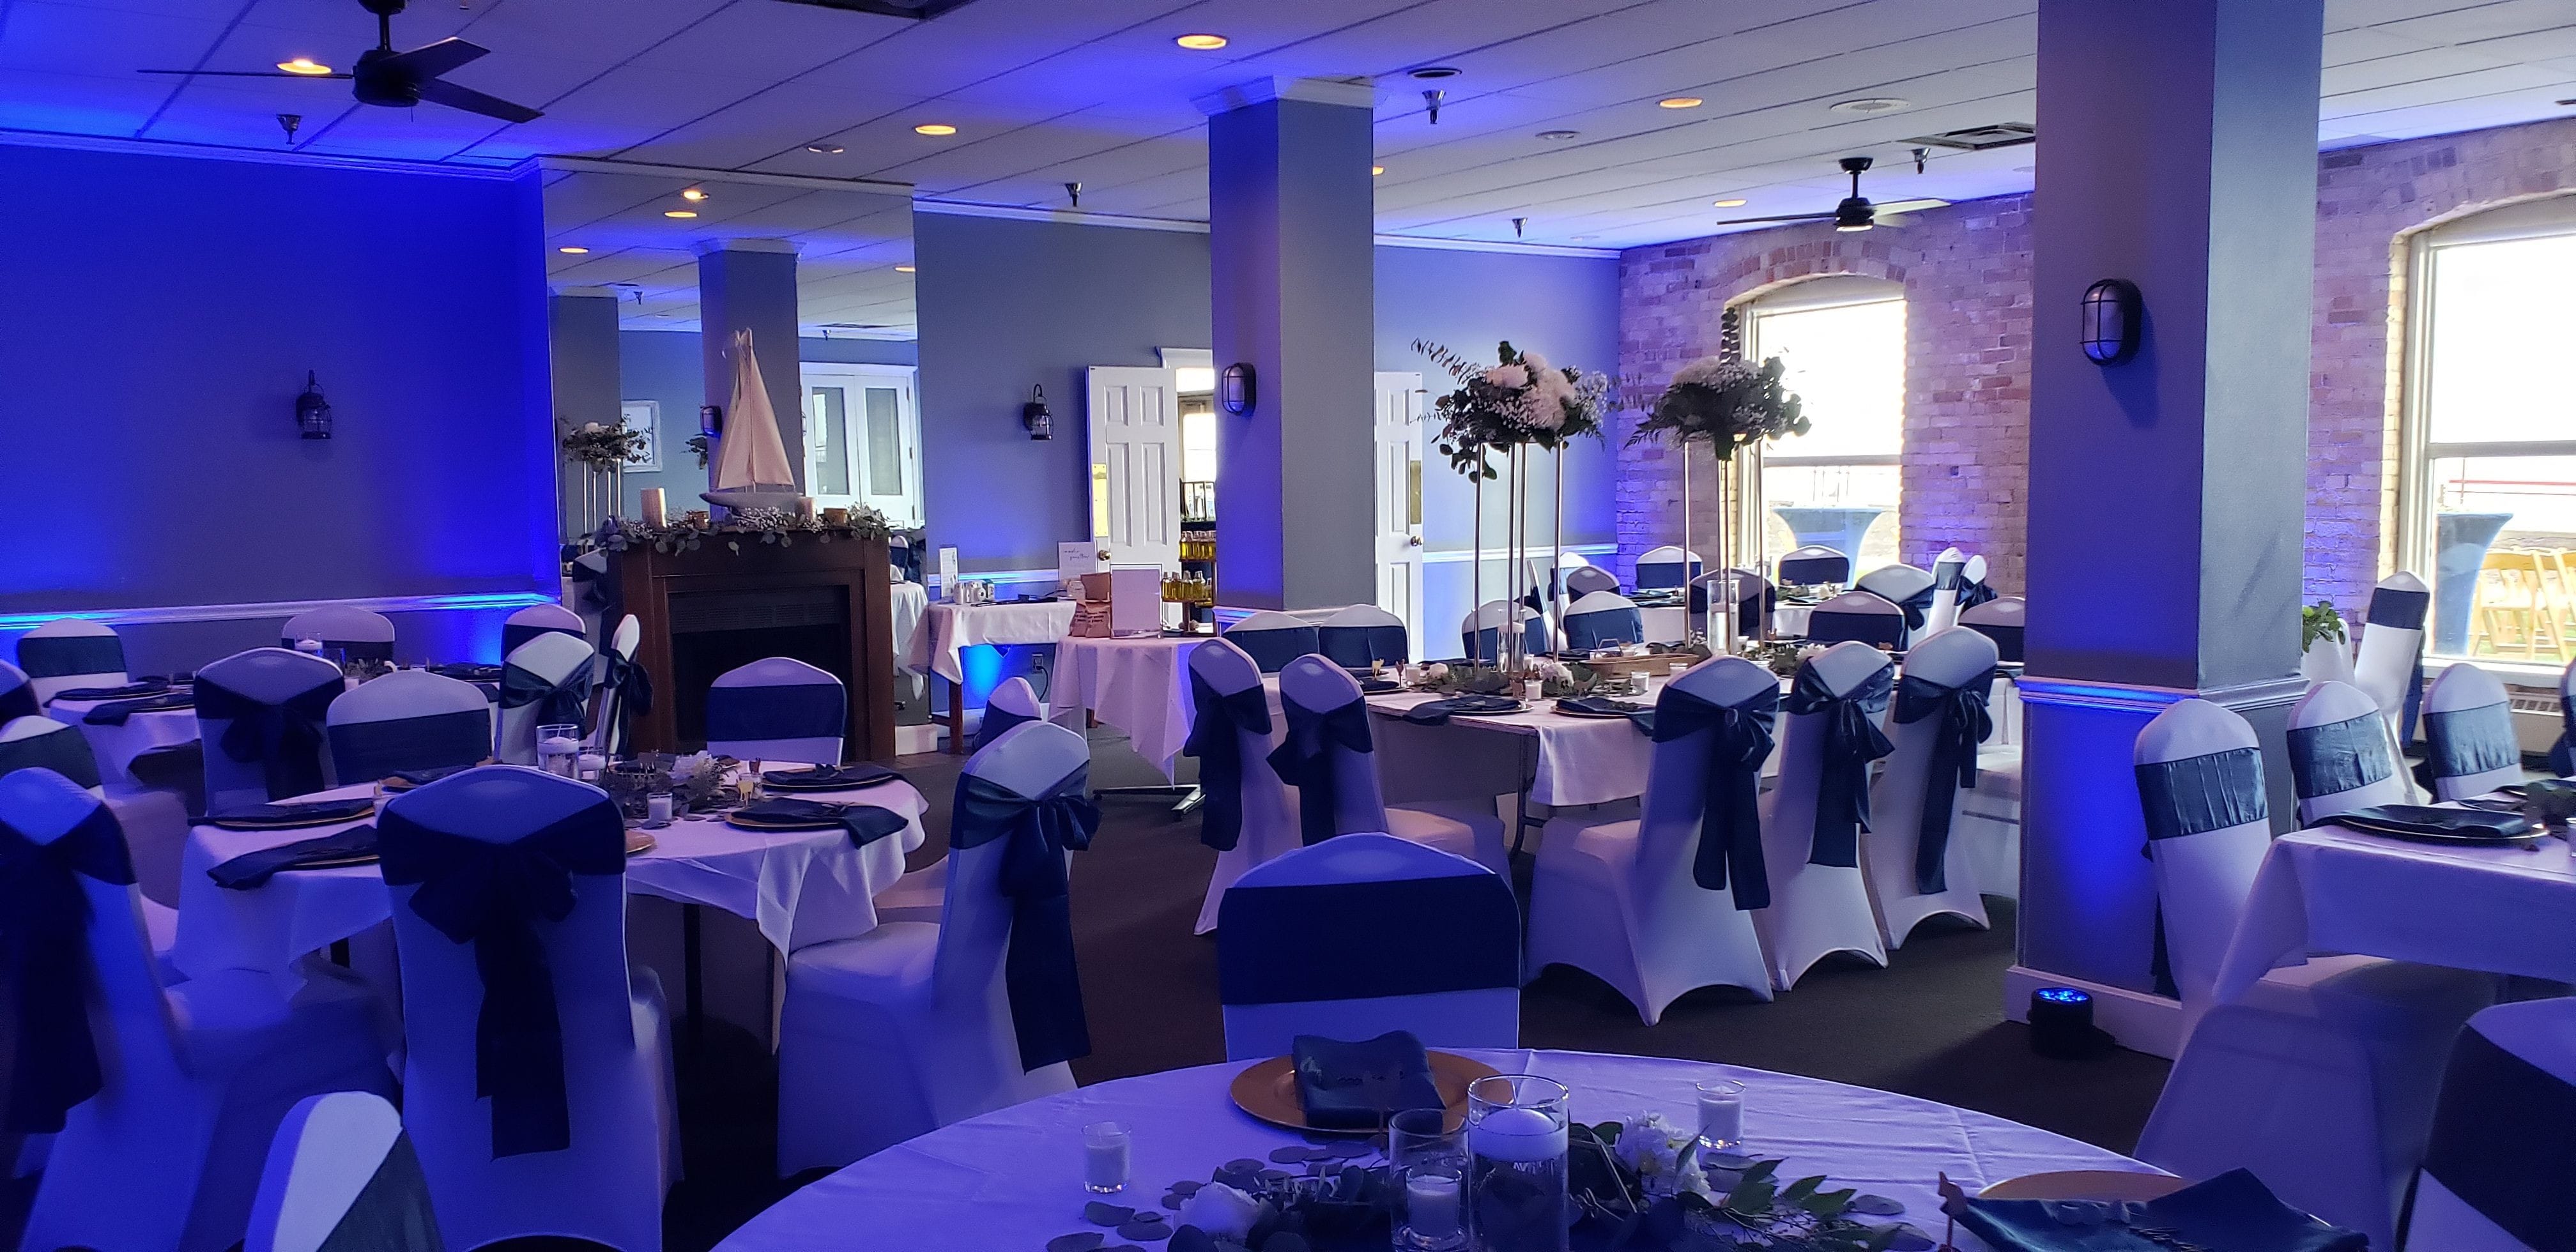 Wedding lighting at the Boat Club in Fitger's with blue up lighting by Duluth Event Lighting.